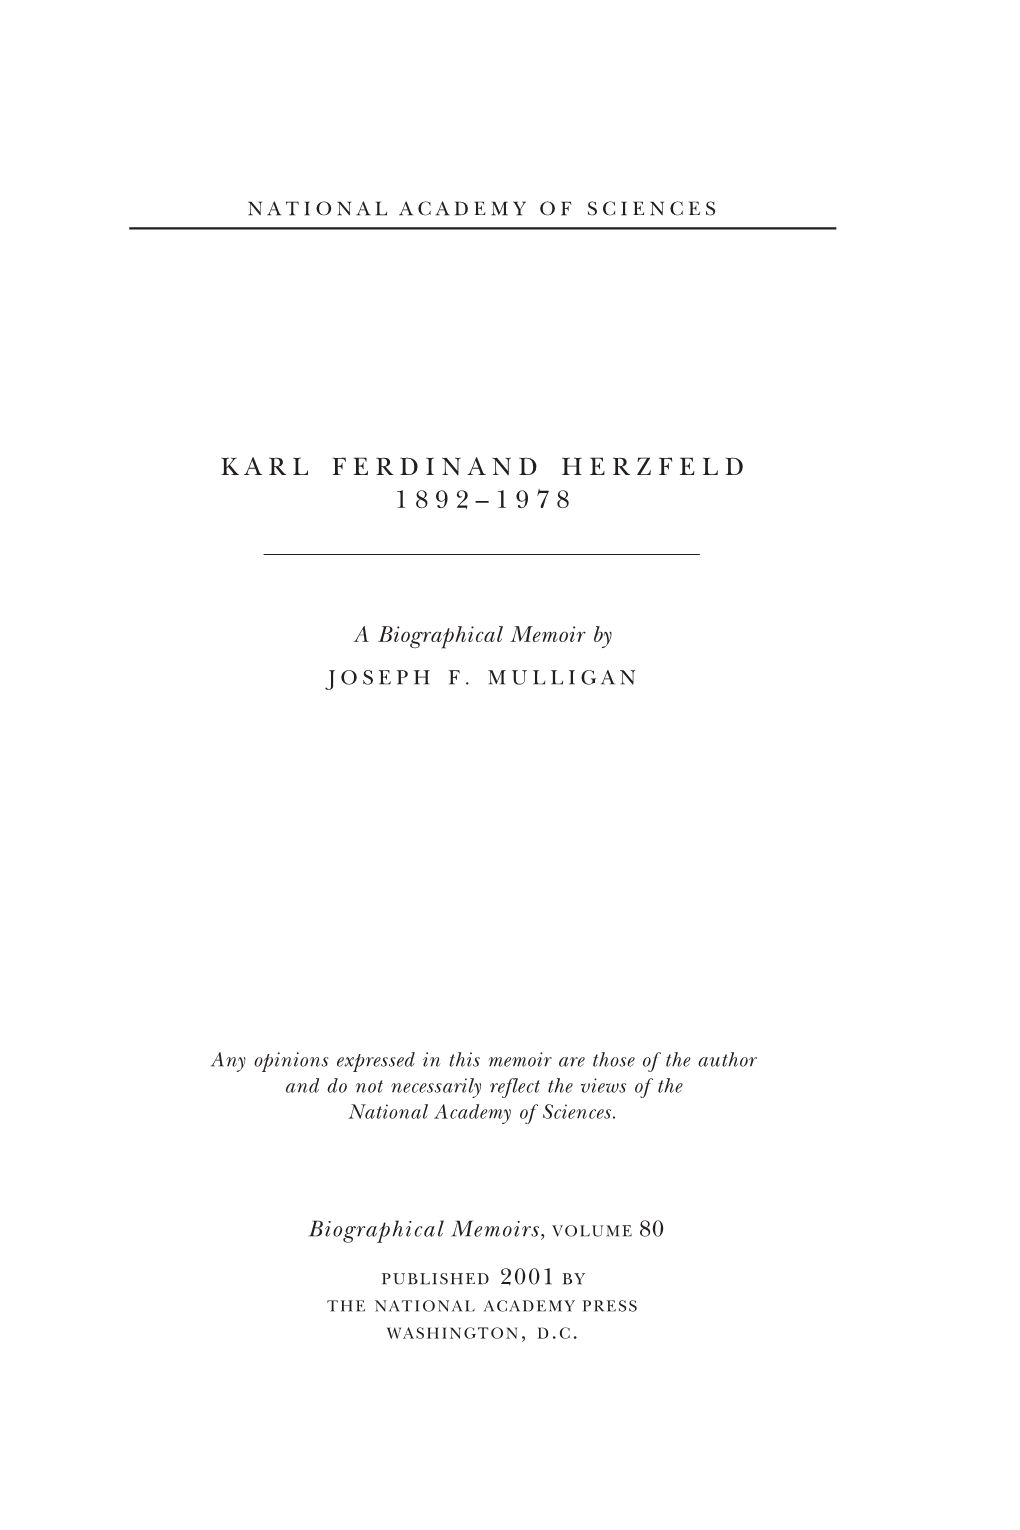 Karl Herzfeld Retained Ties with His Family and with the German Physics Community by Occasional Visits to Germany